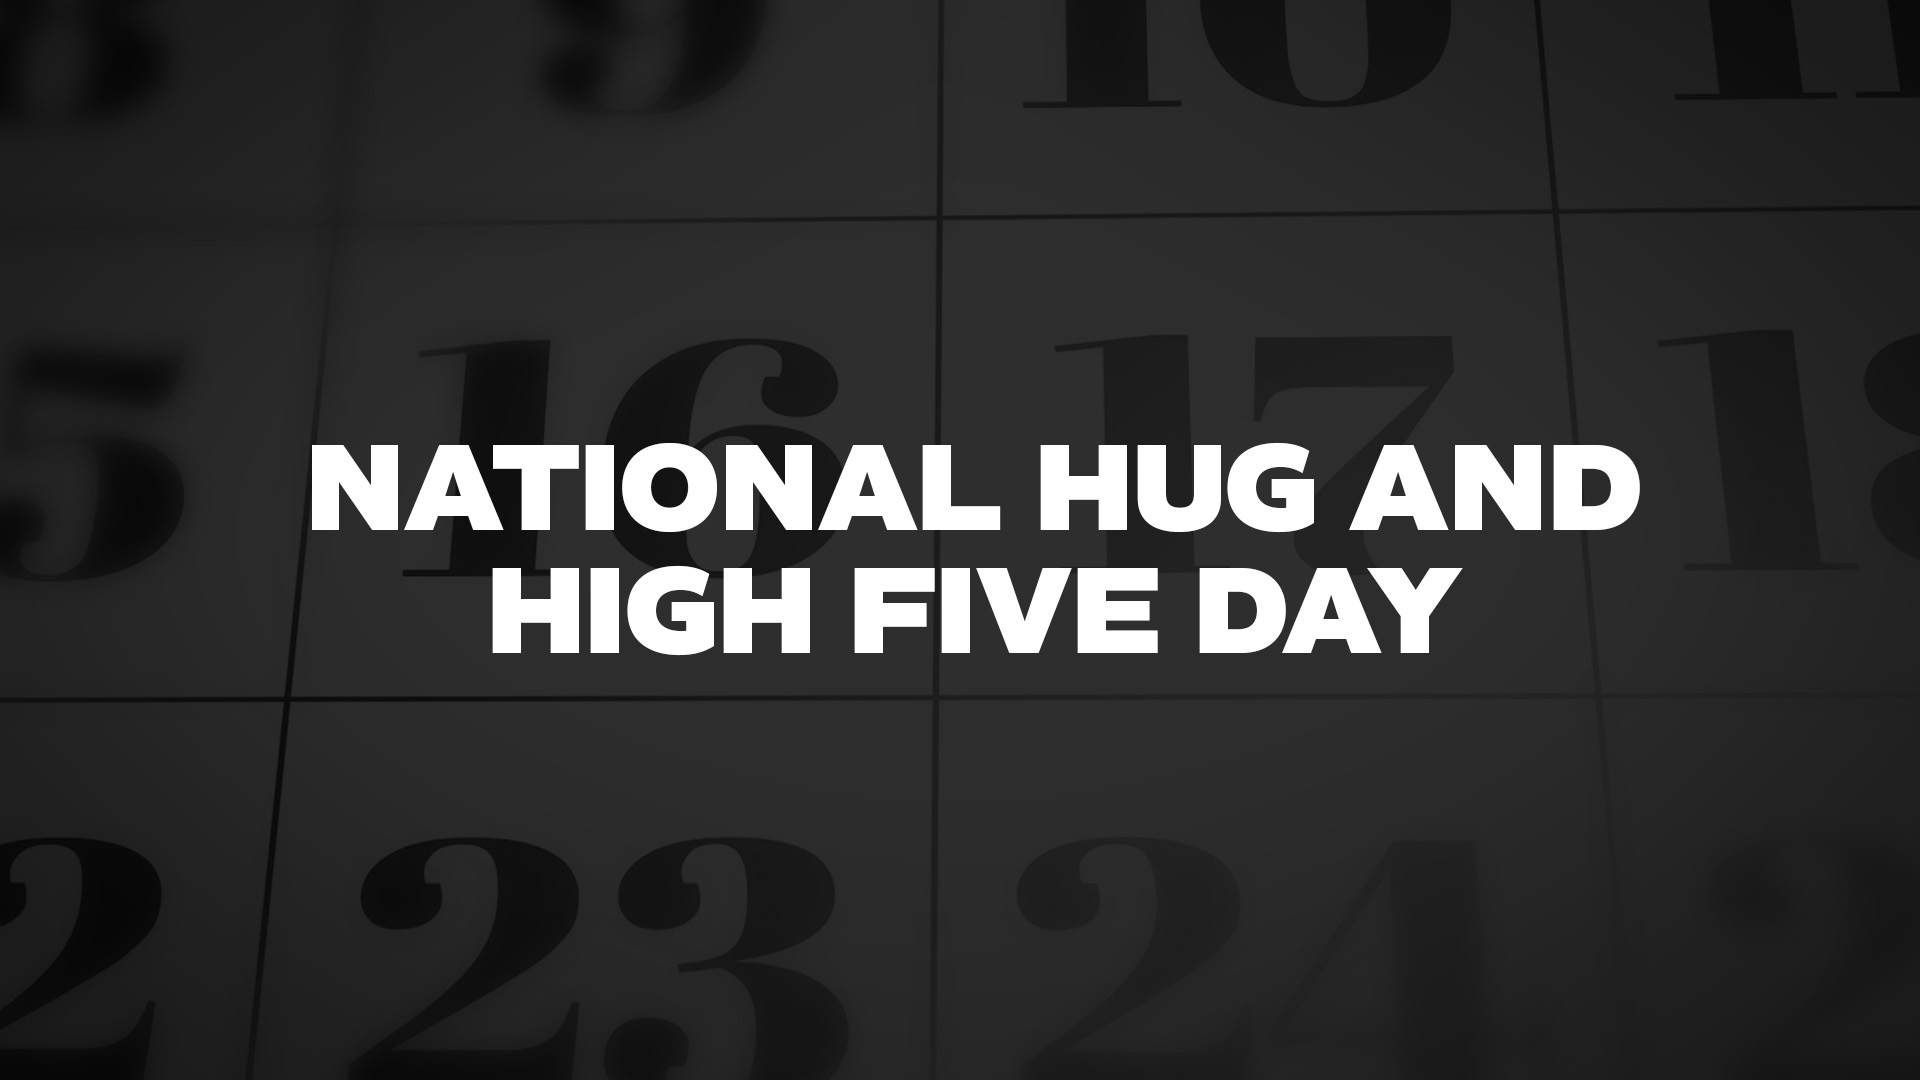 National High Five Day